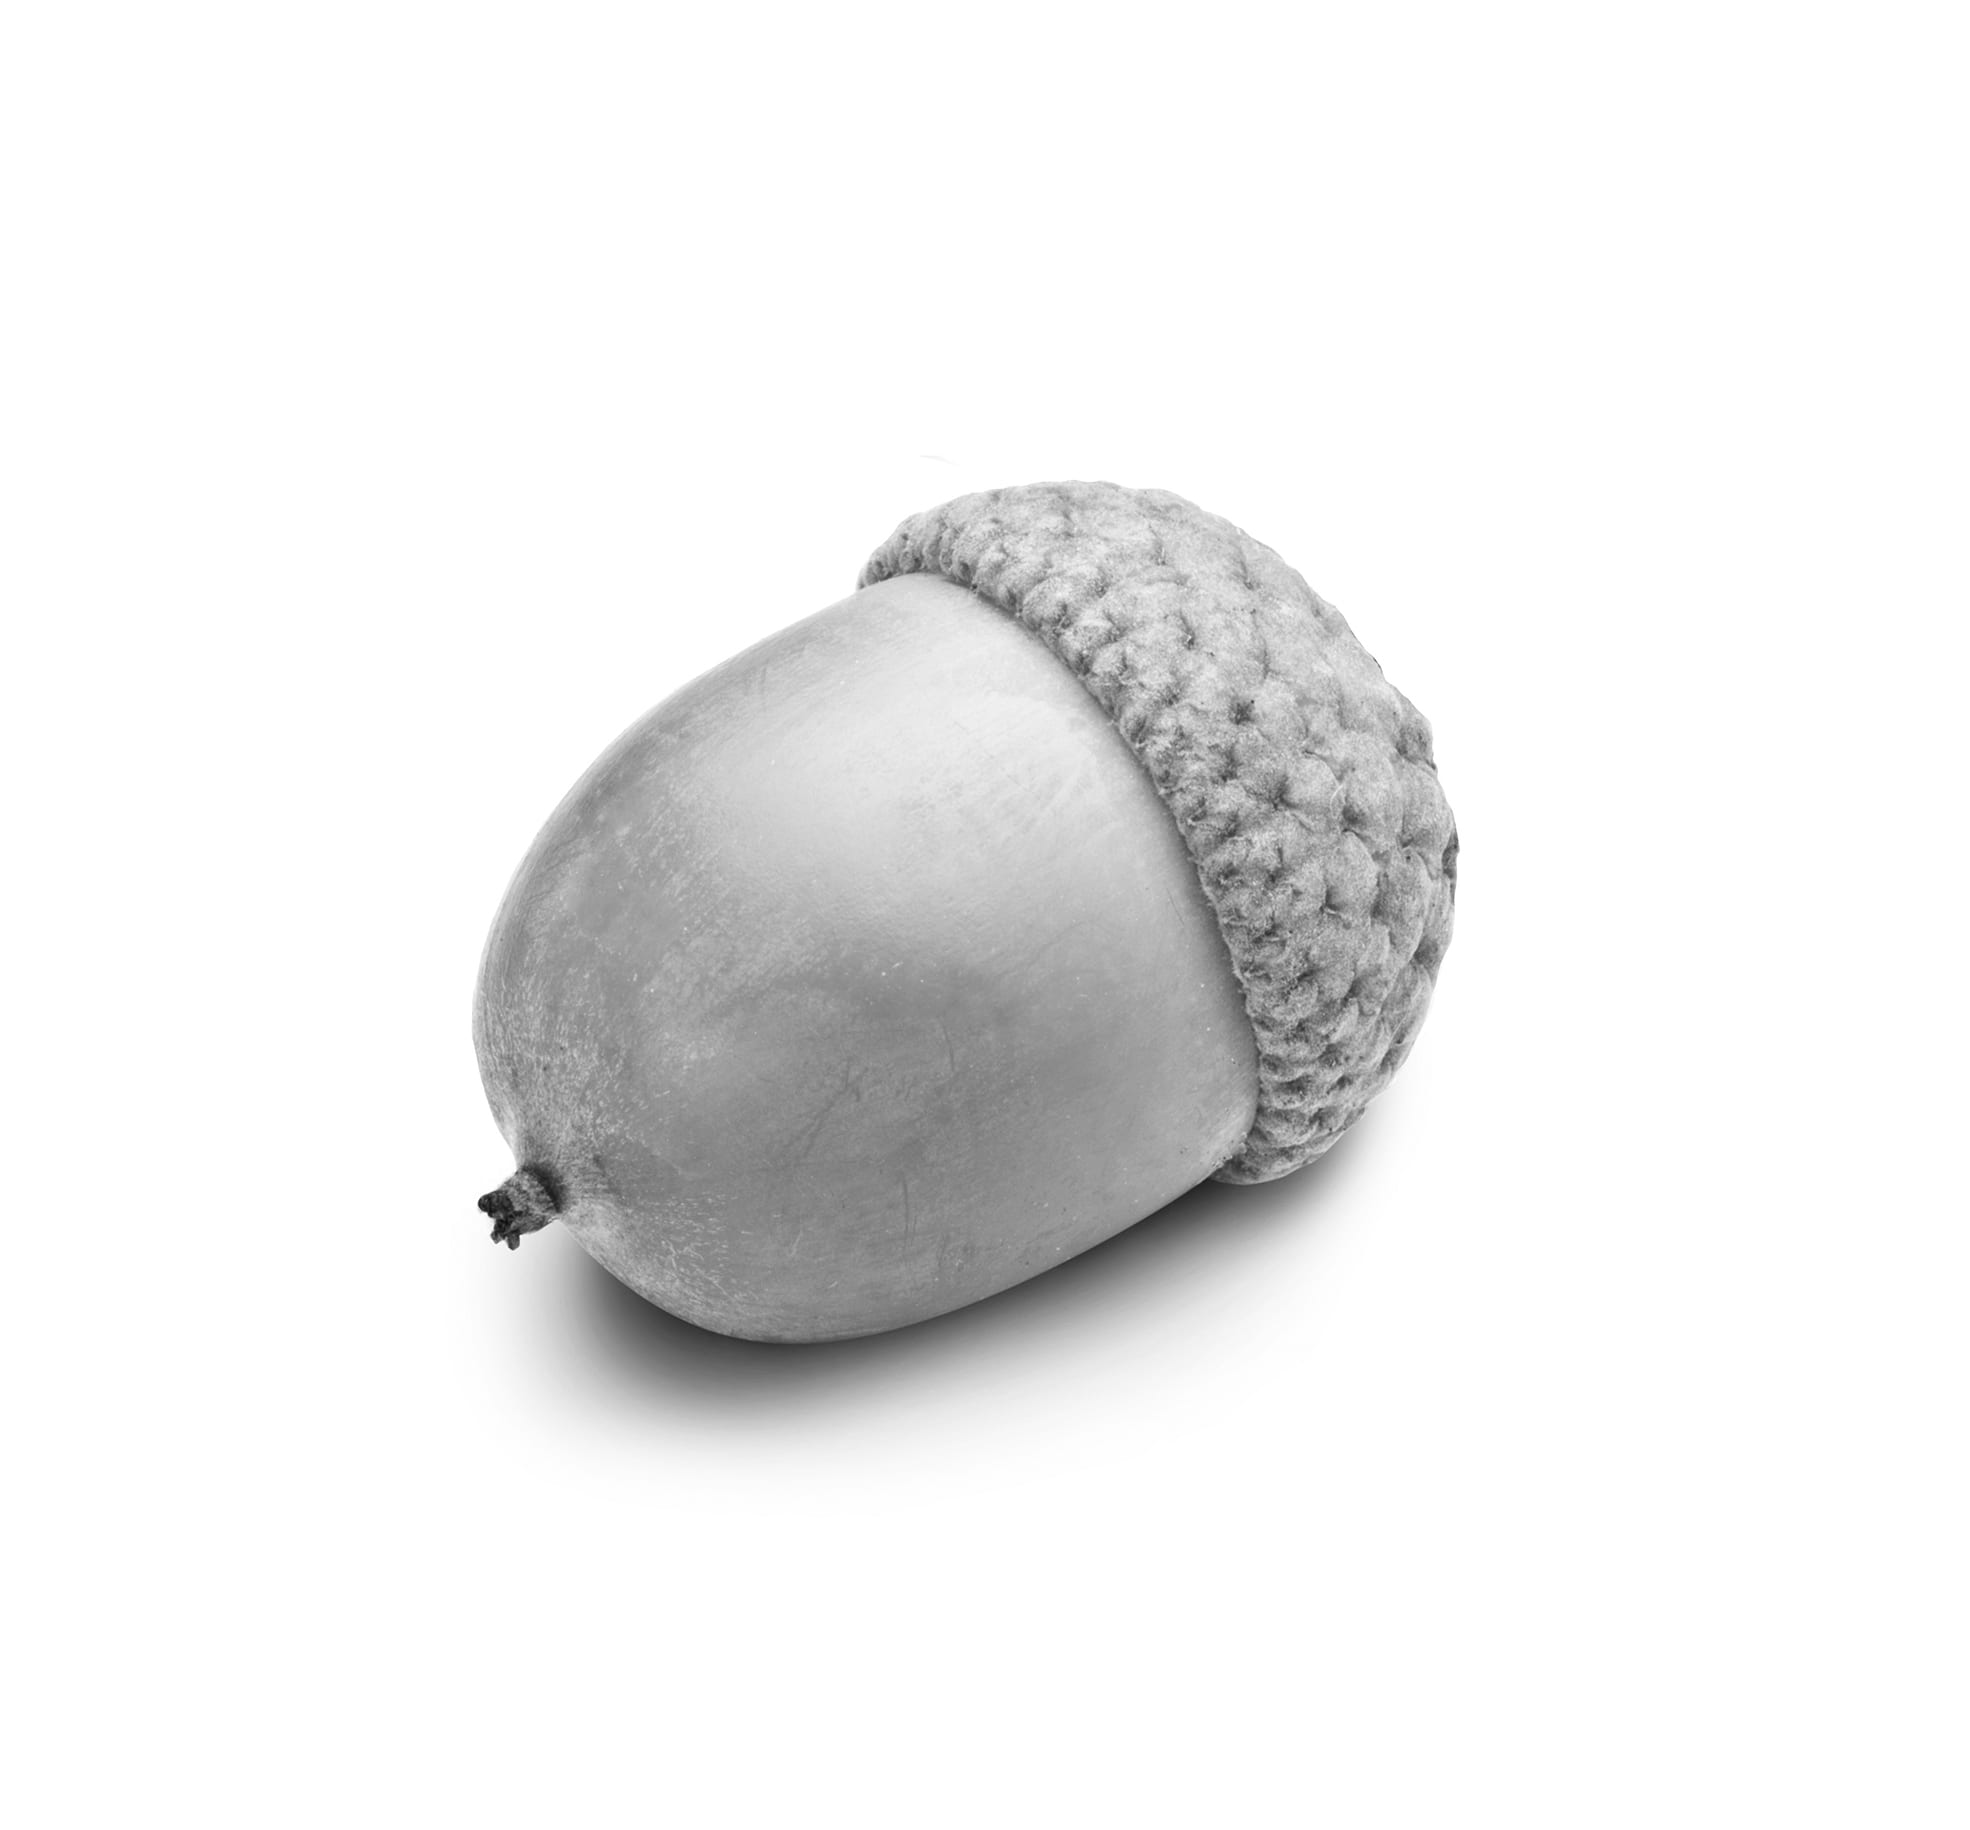 A black and white image of a single acorn in grey on a white background